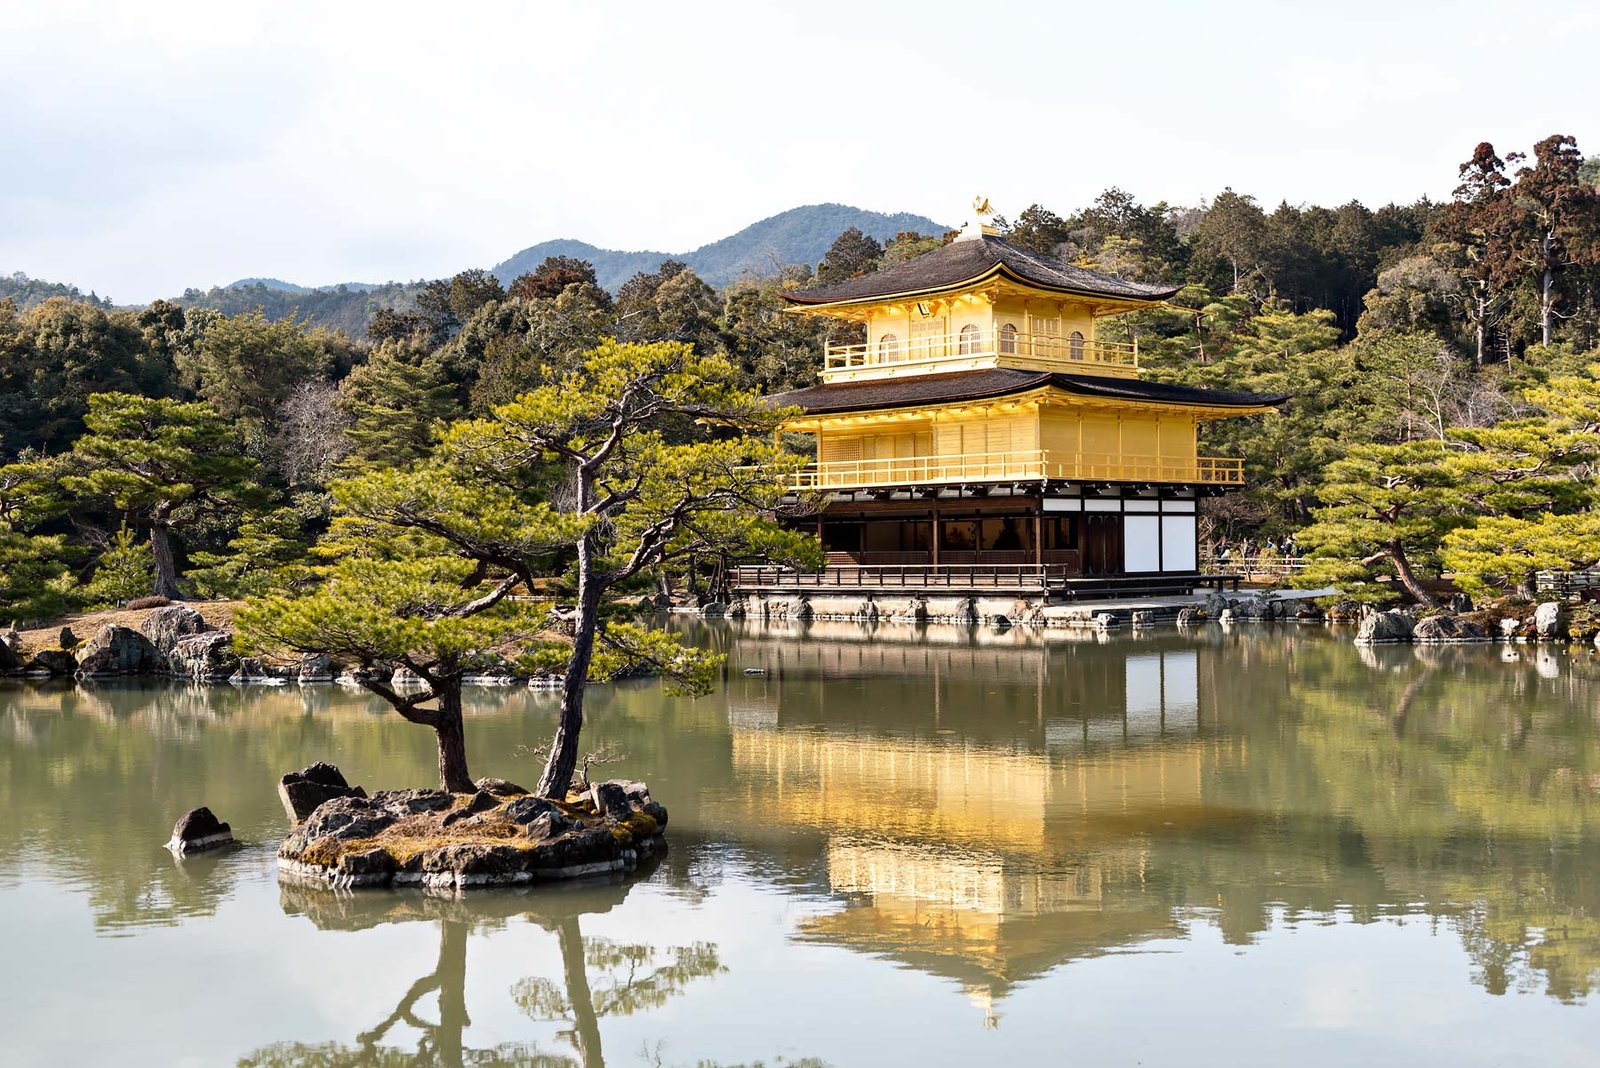 Golden Pavilion Kinkaku-ji in Kyoto. Read more about My 8 Favorite Things to Do and See in Kyoto on Urban Pixxels.